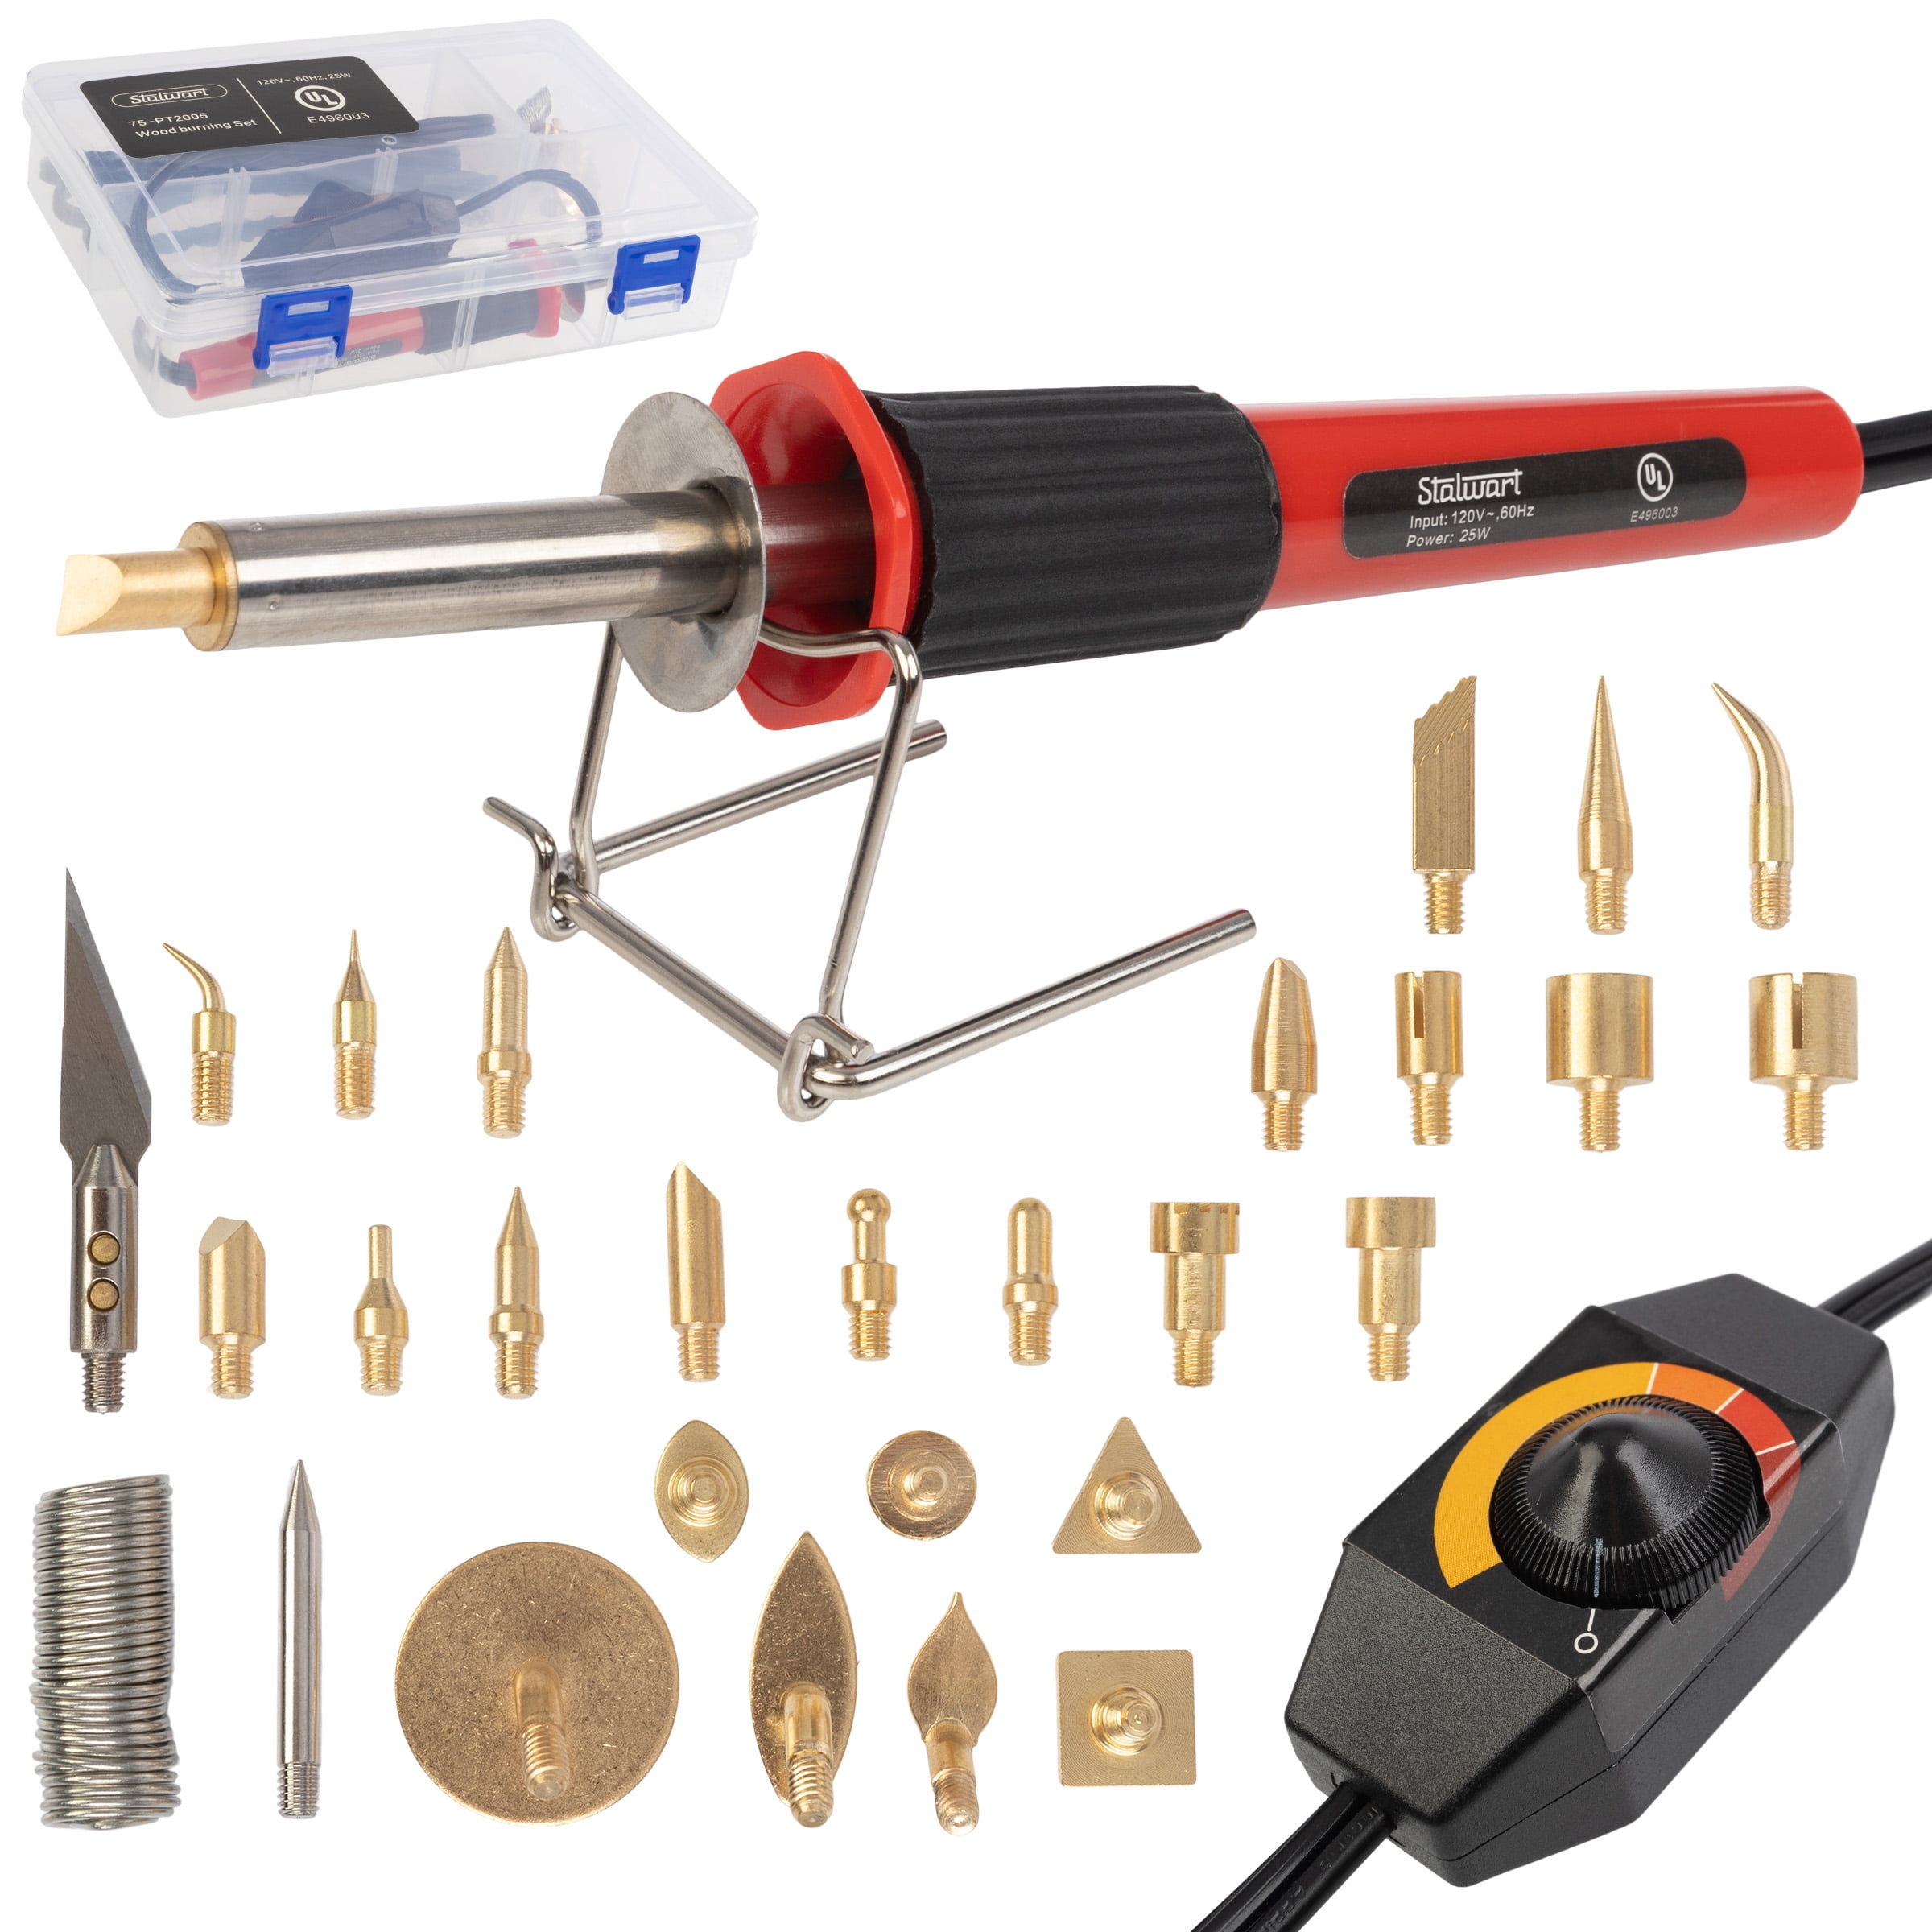 Gener8 Wood Burning Kit Recommended Teens Ages 14 Years and up. 